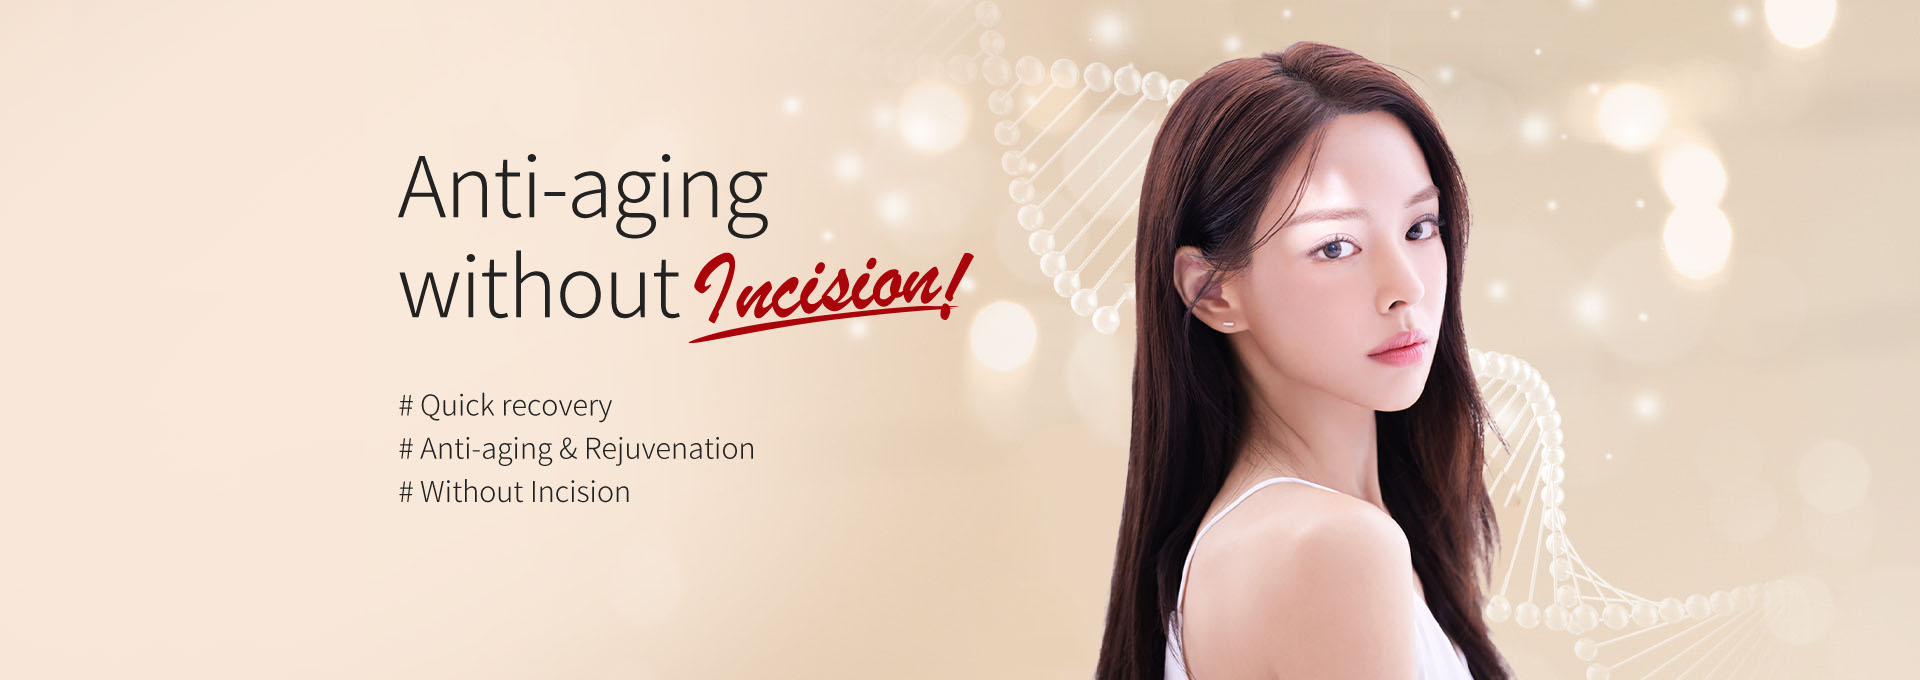 Anti-aging without incision!